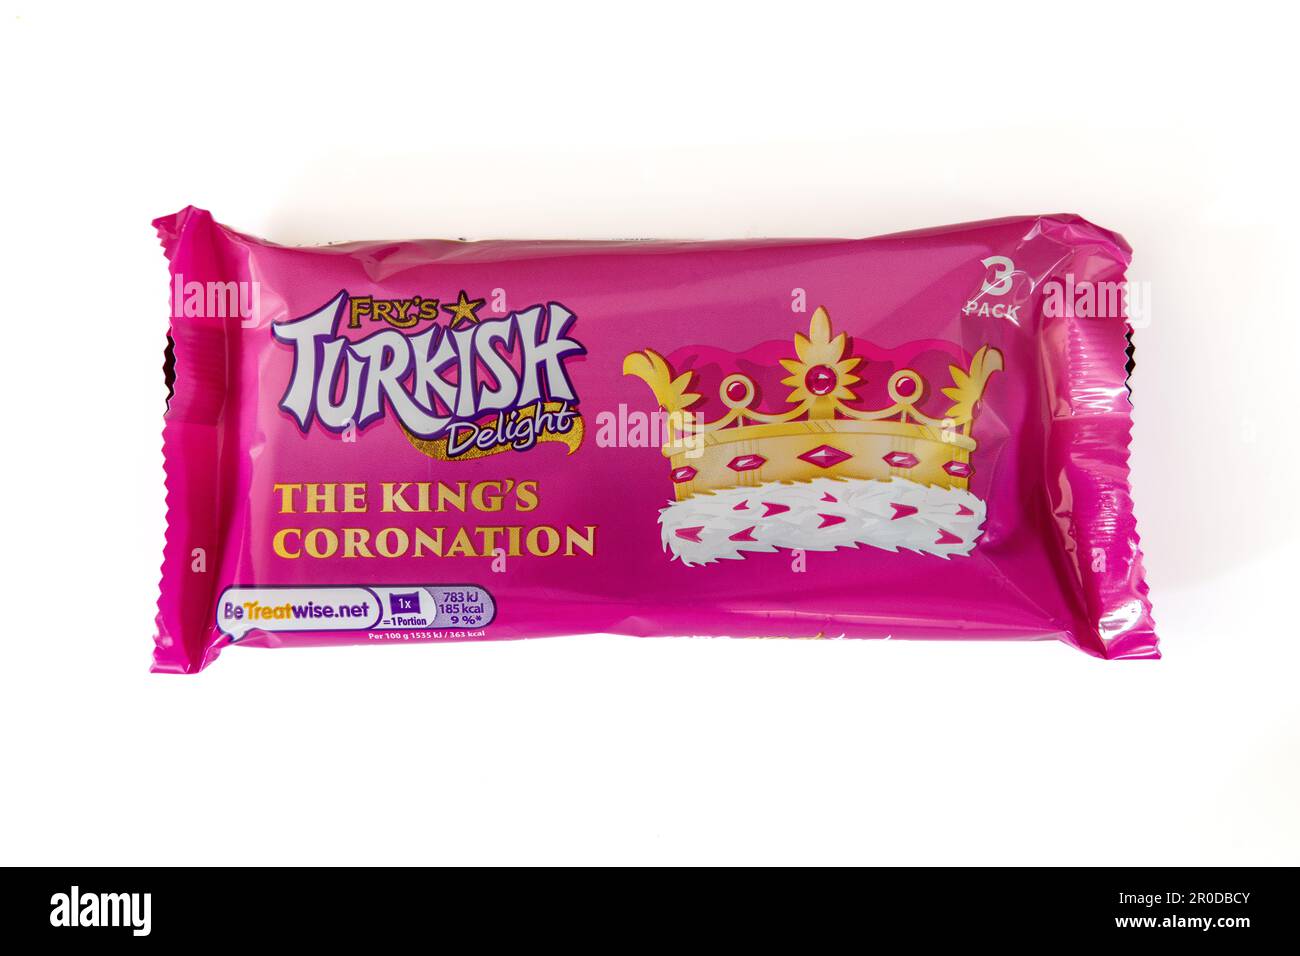 Fry's Turkish Delight limited edition King’s Coronation packaging Stock Photo